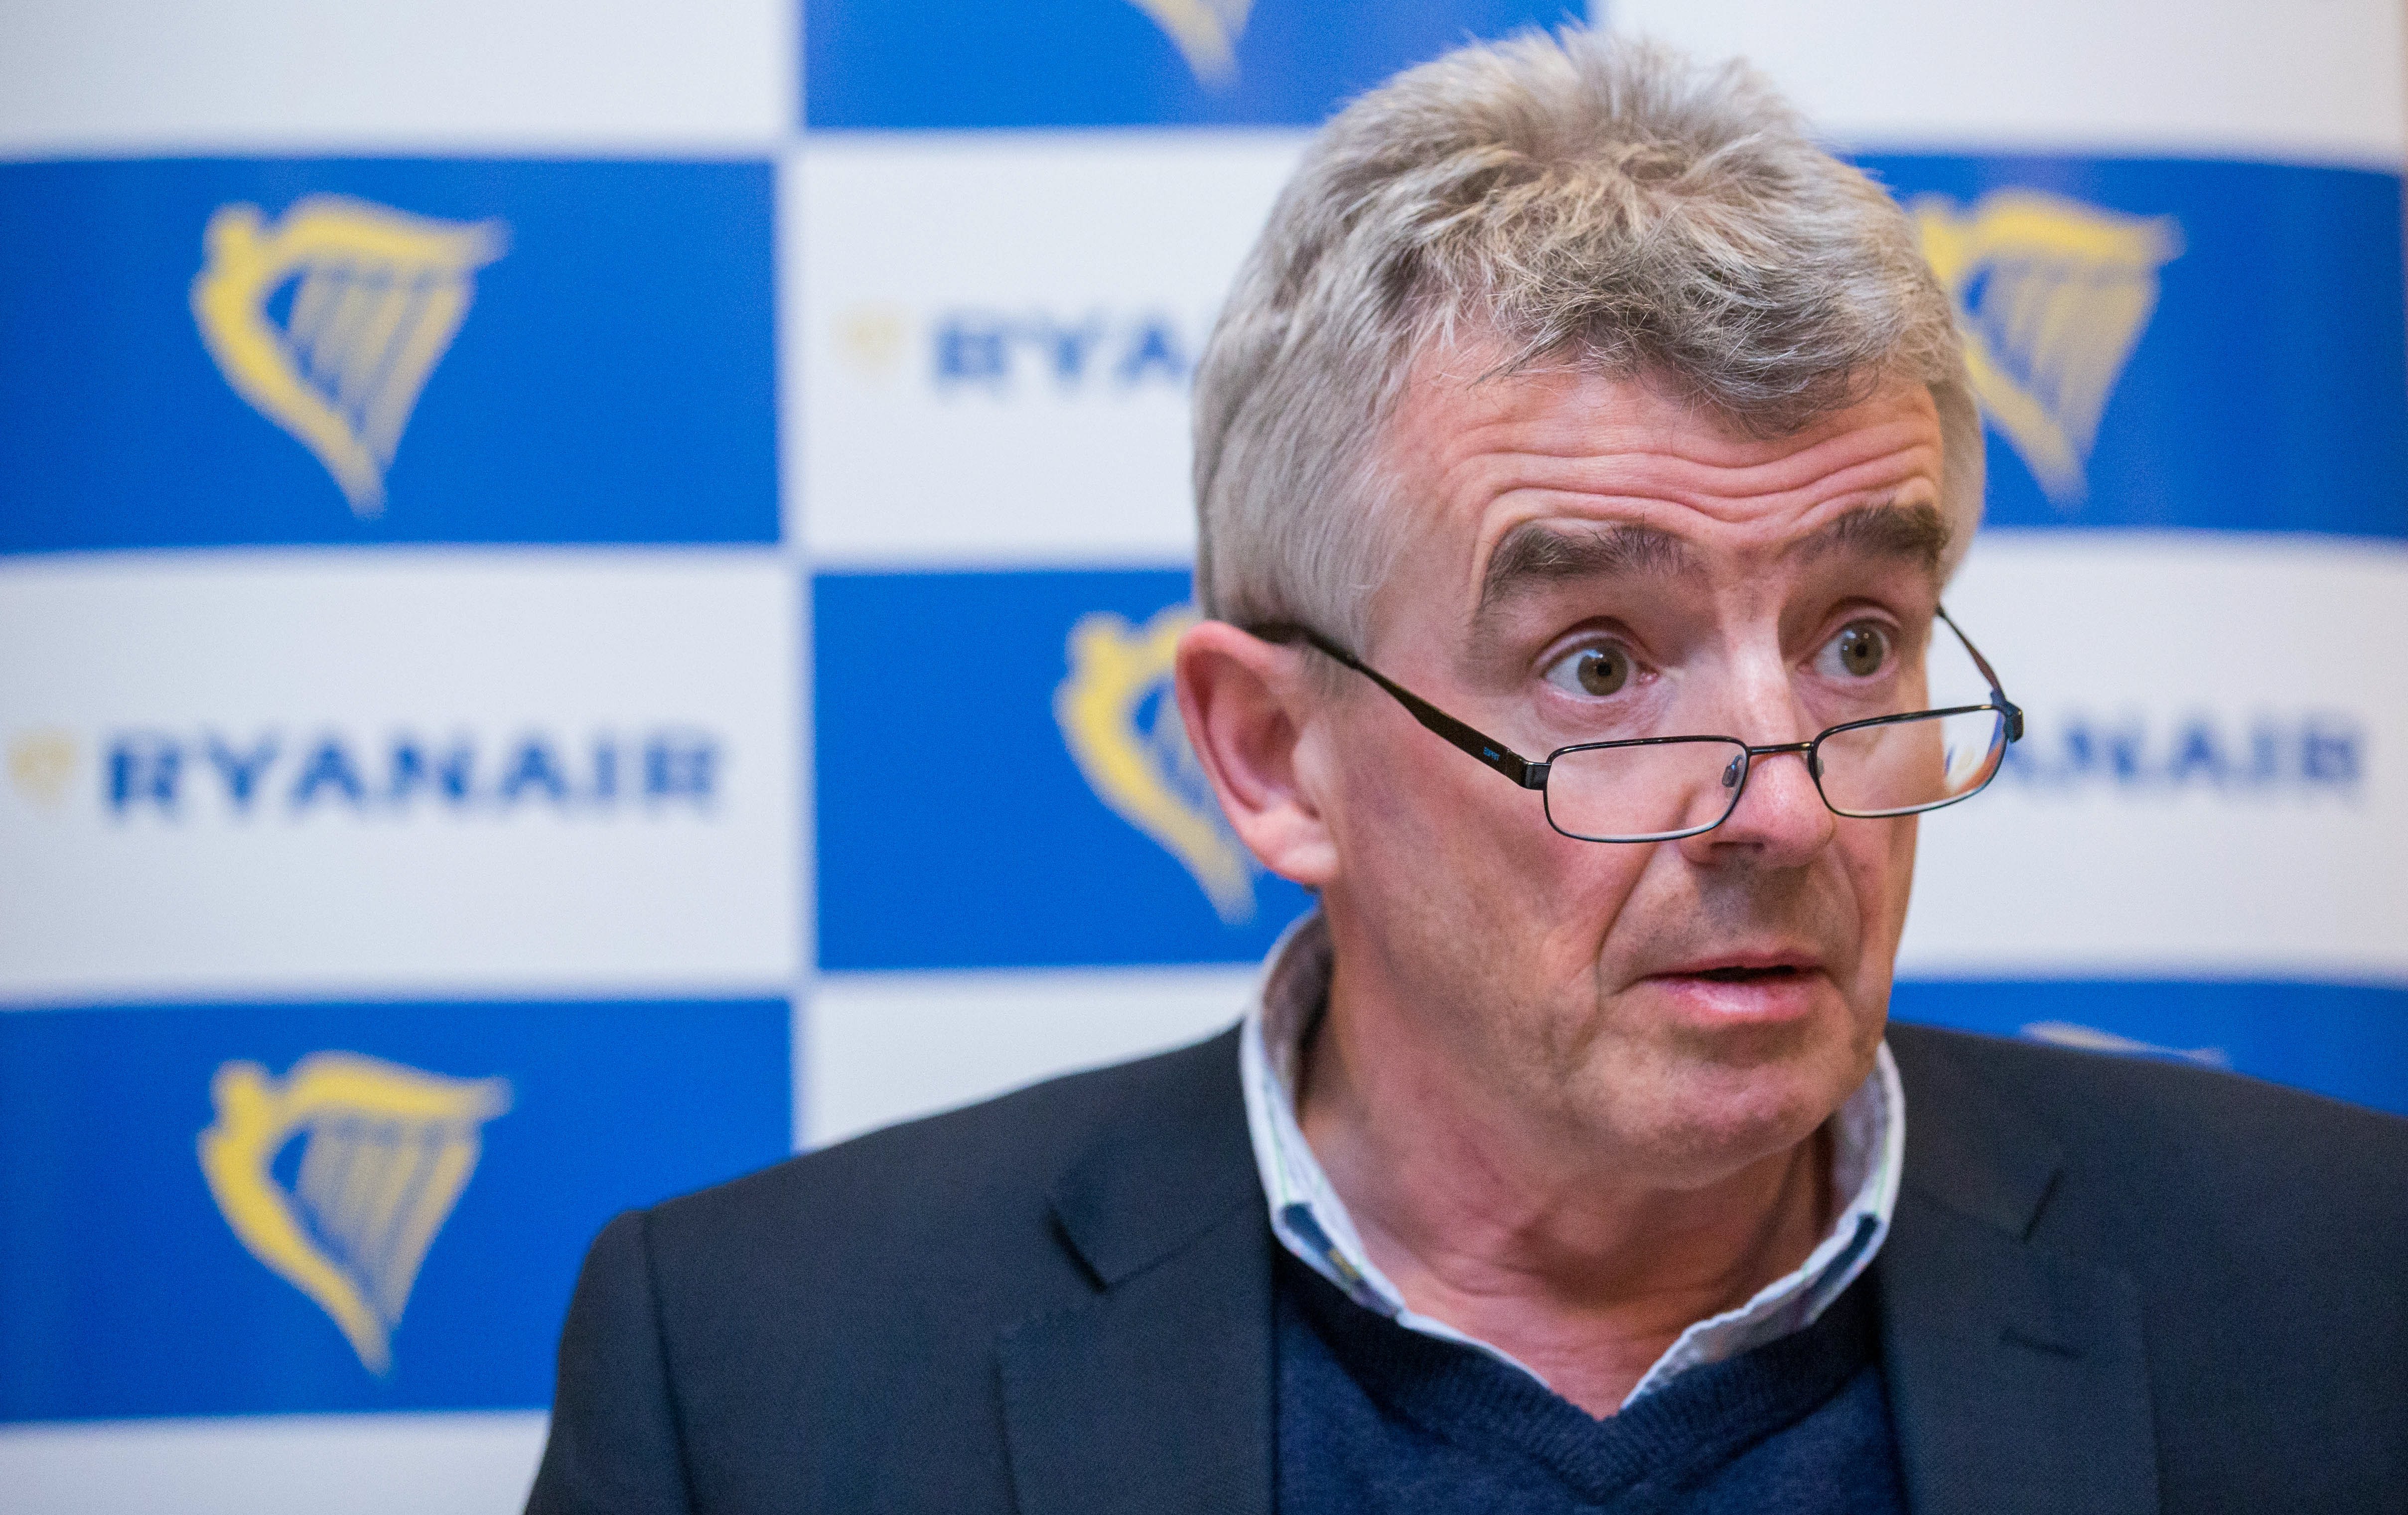 Michael O'Leary, CEO of Irish budget airline 'Ryanair', speaks during a news conference to present the financial results of the compagny in Brussels, Belgium, 07 February 2017. Michael O'Leary announced six new destinations from Brussels' Charleroi airport. EPA/STEPHANIE LECOCQ